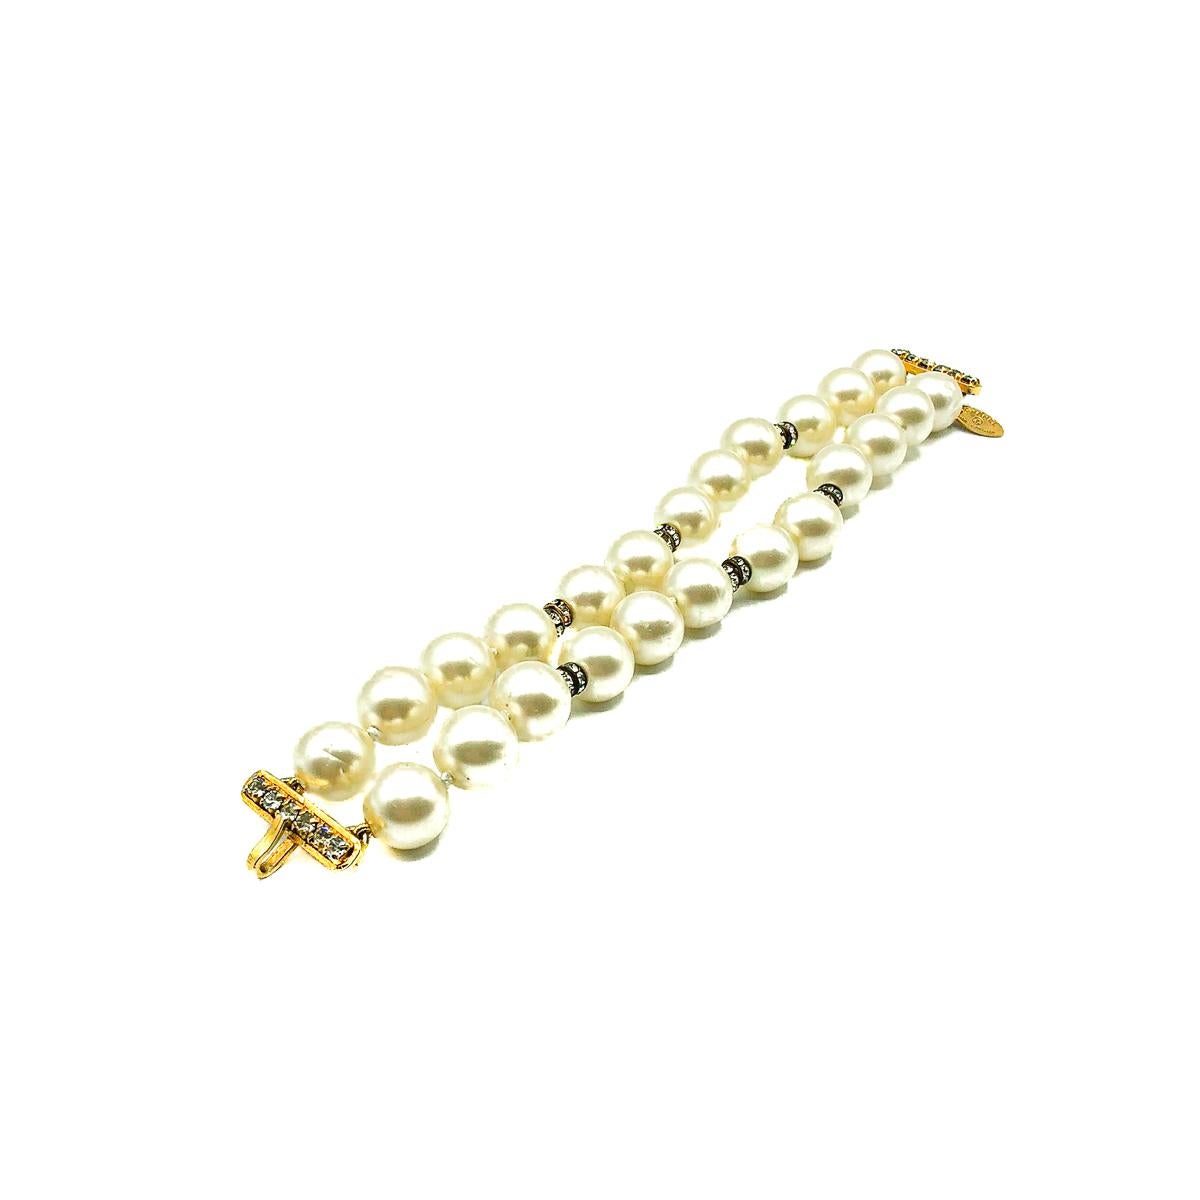 A dreamy Vintage Chanel pearl bracelet around fifty years old. Crafted from poured glass baroque pearls, paste rondelles and gold plated metal. Featuring a double strand of large pearls interspersed with pastes and finished to perfection with a claw